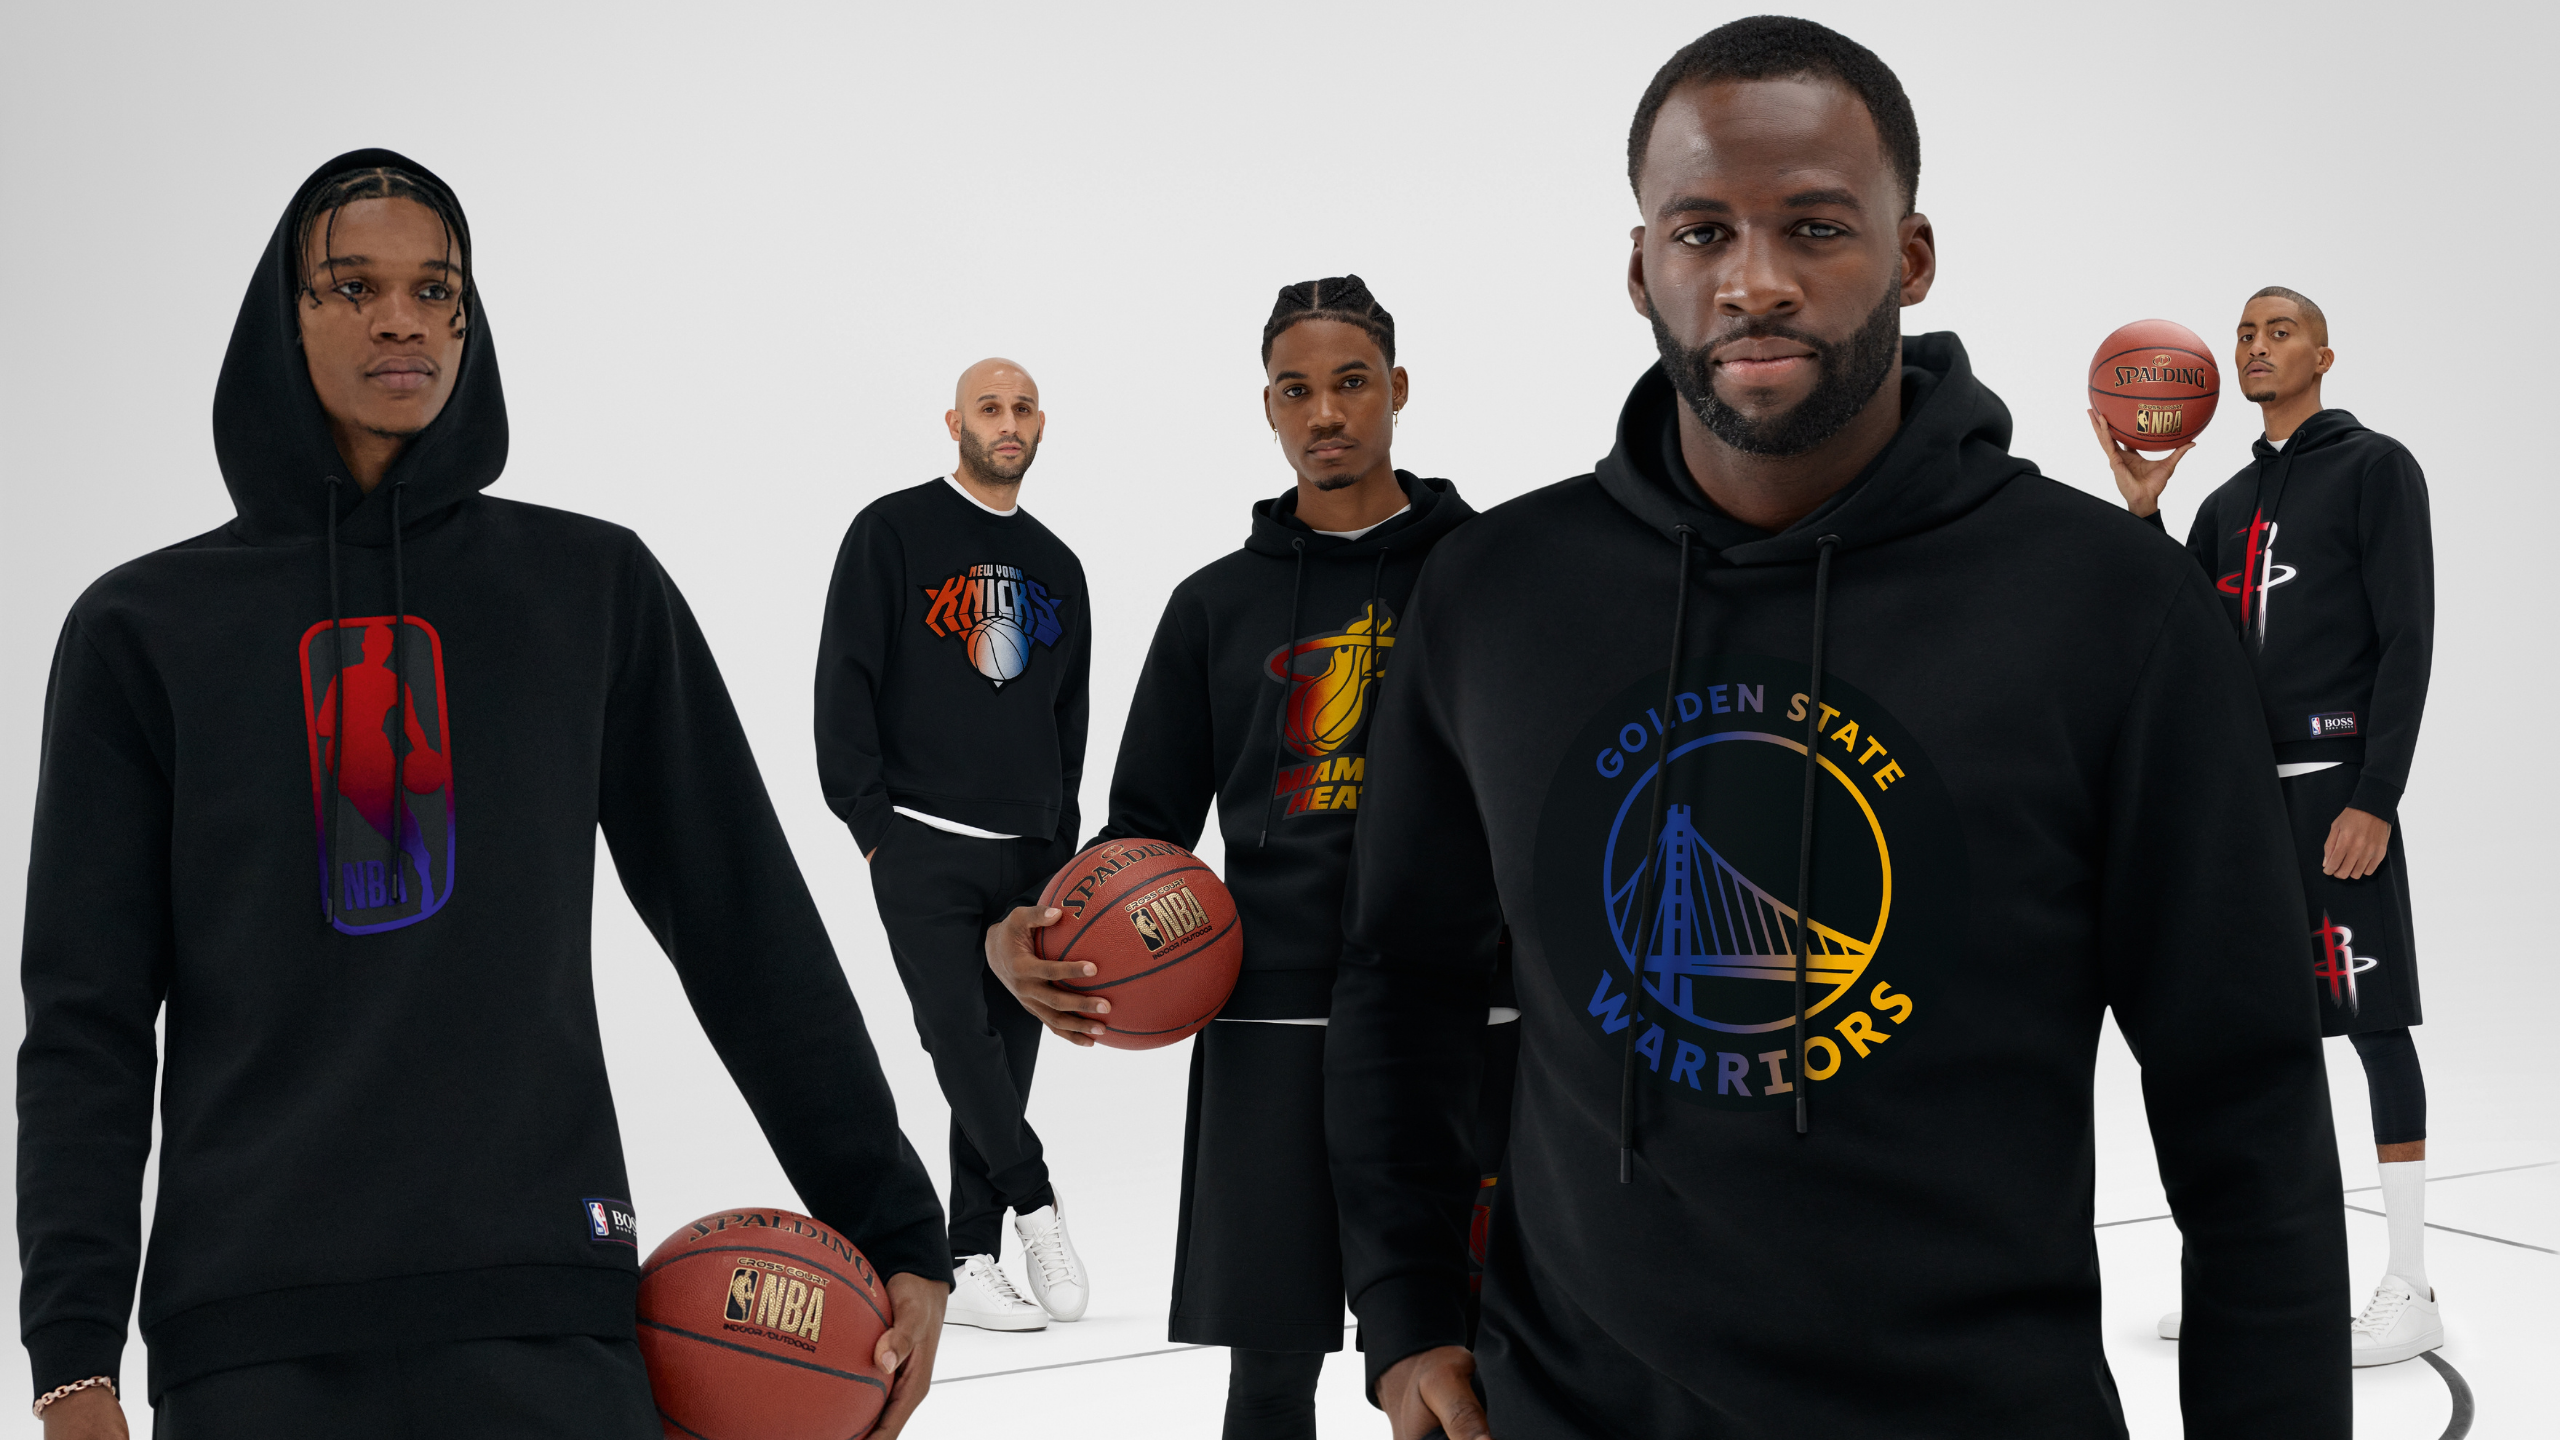 Take your NBA team spirit to the next level with these casual